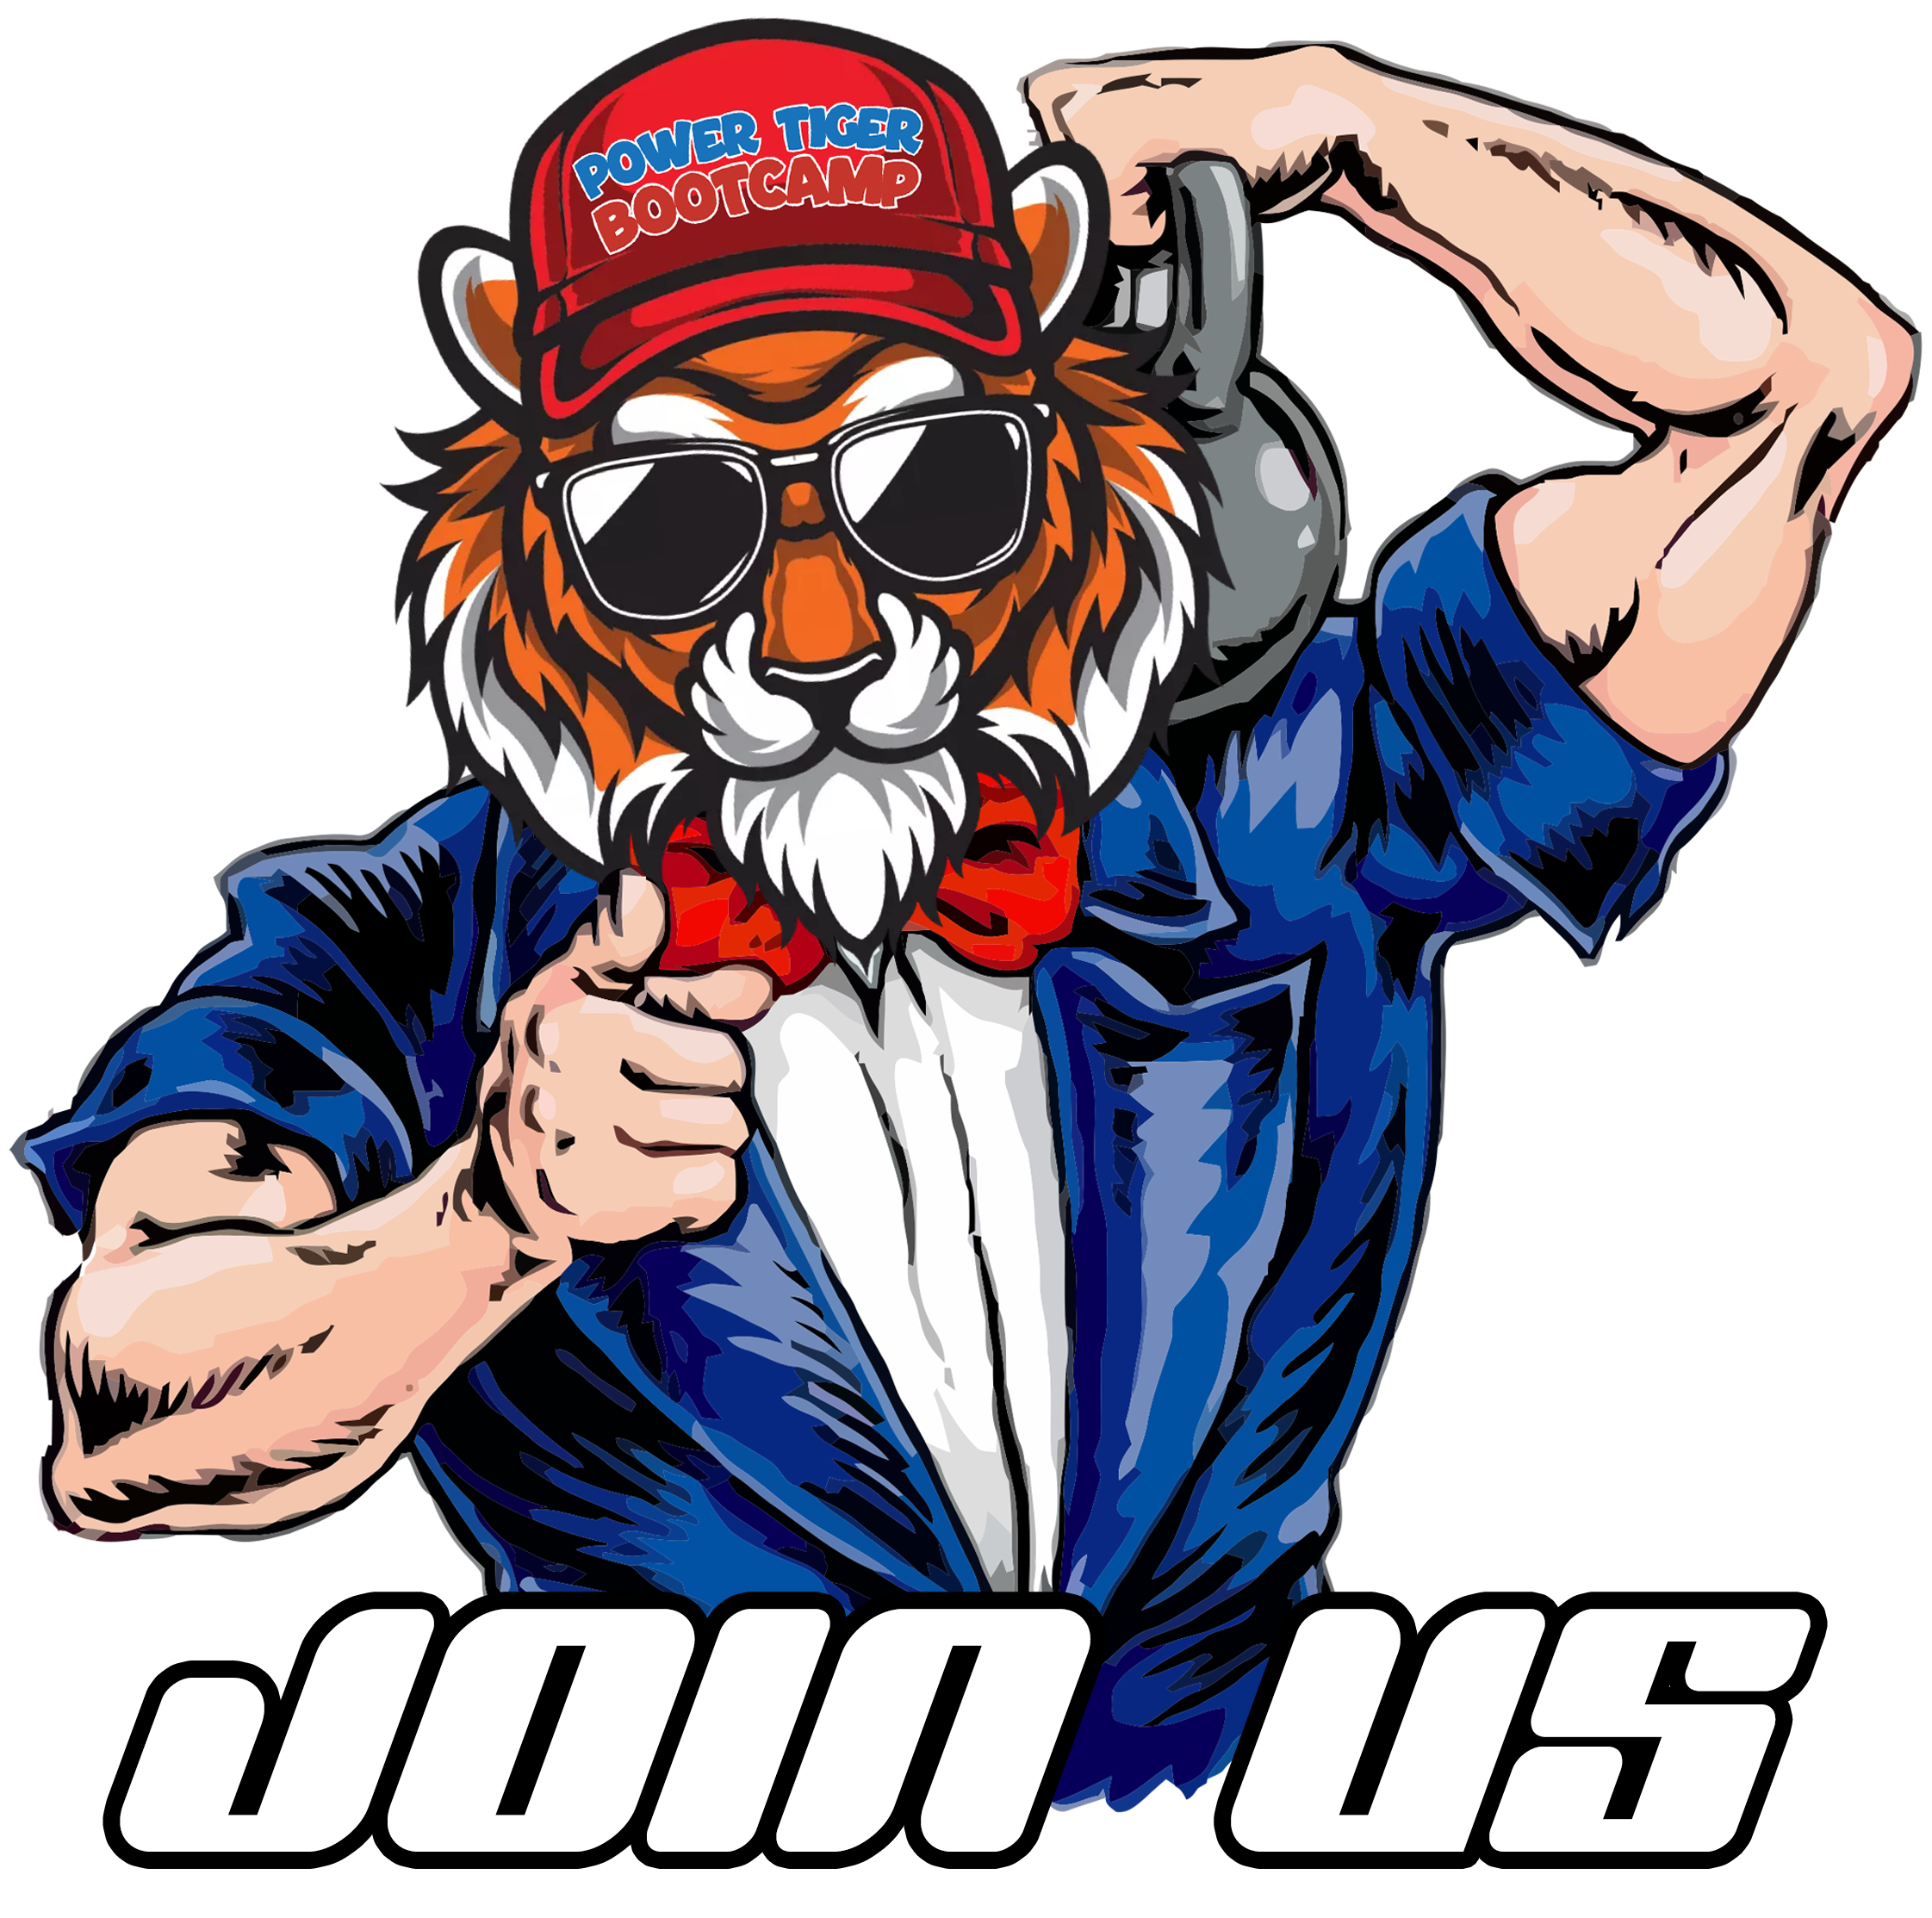 PT - Homepage - Image pic - I want you Tiger plus join 0us